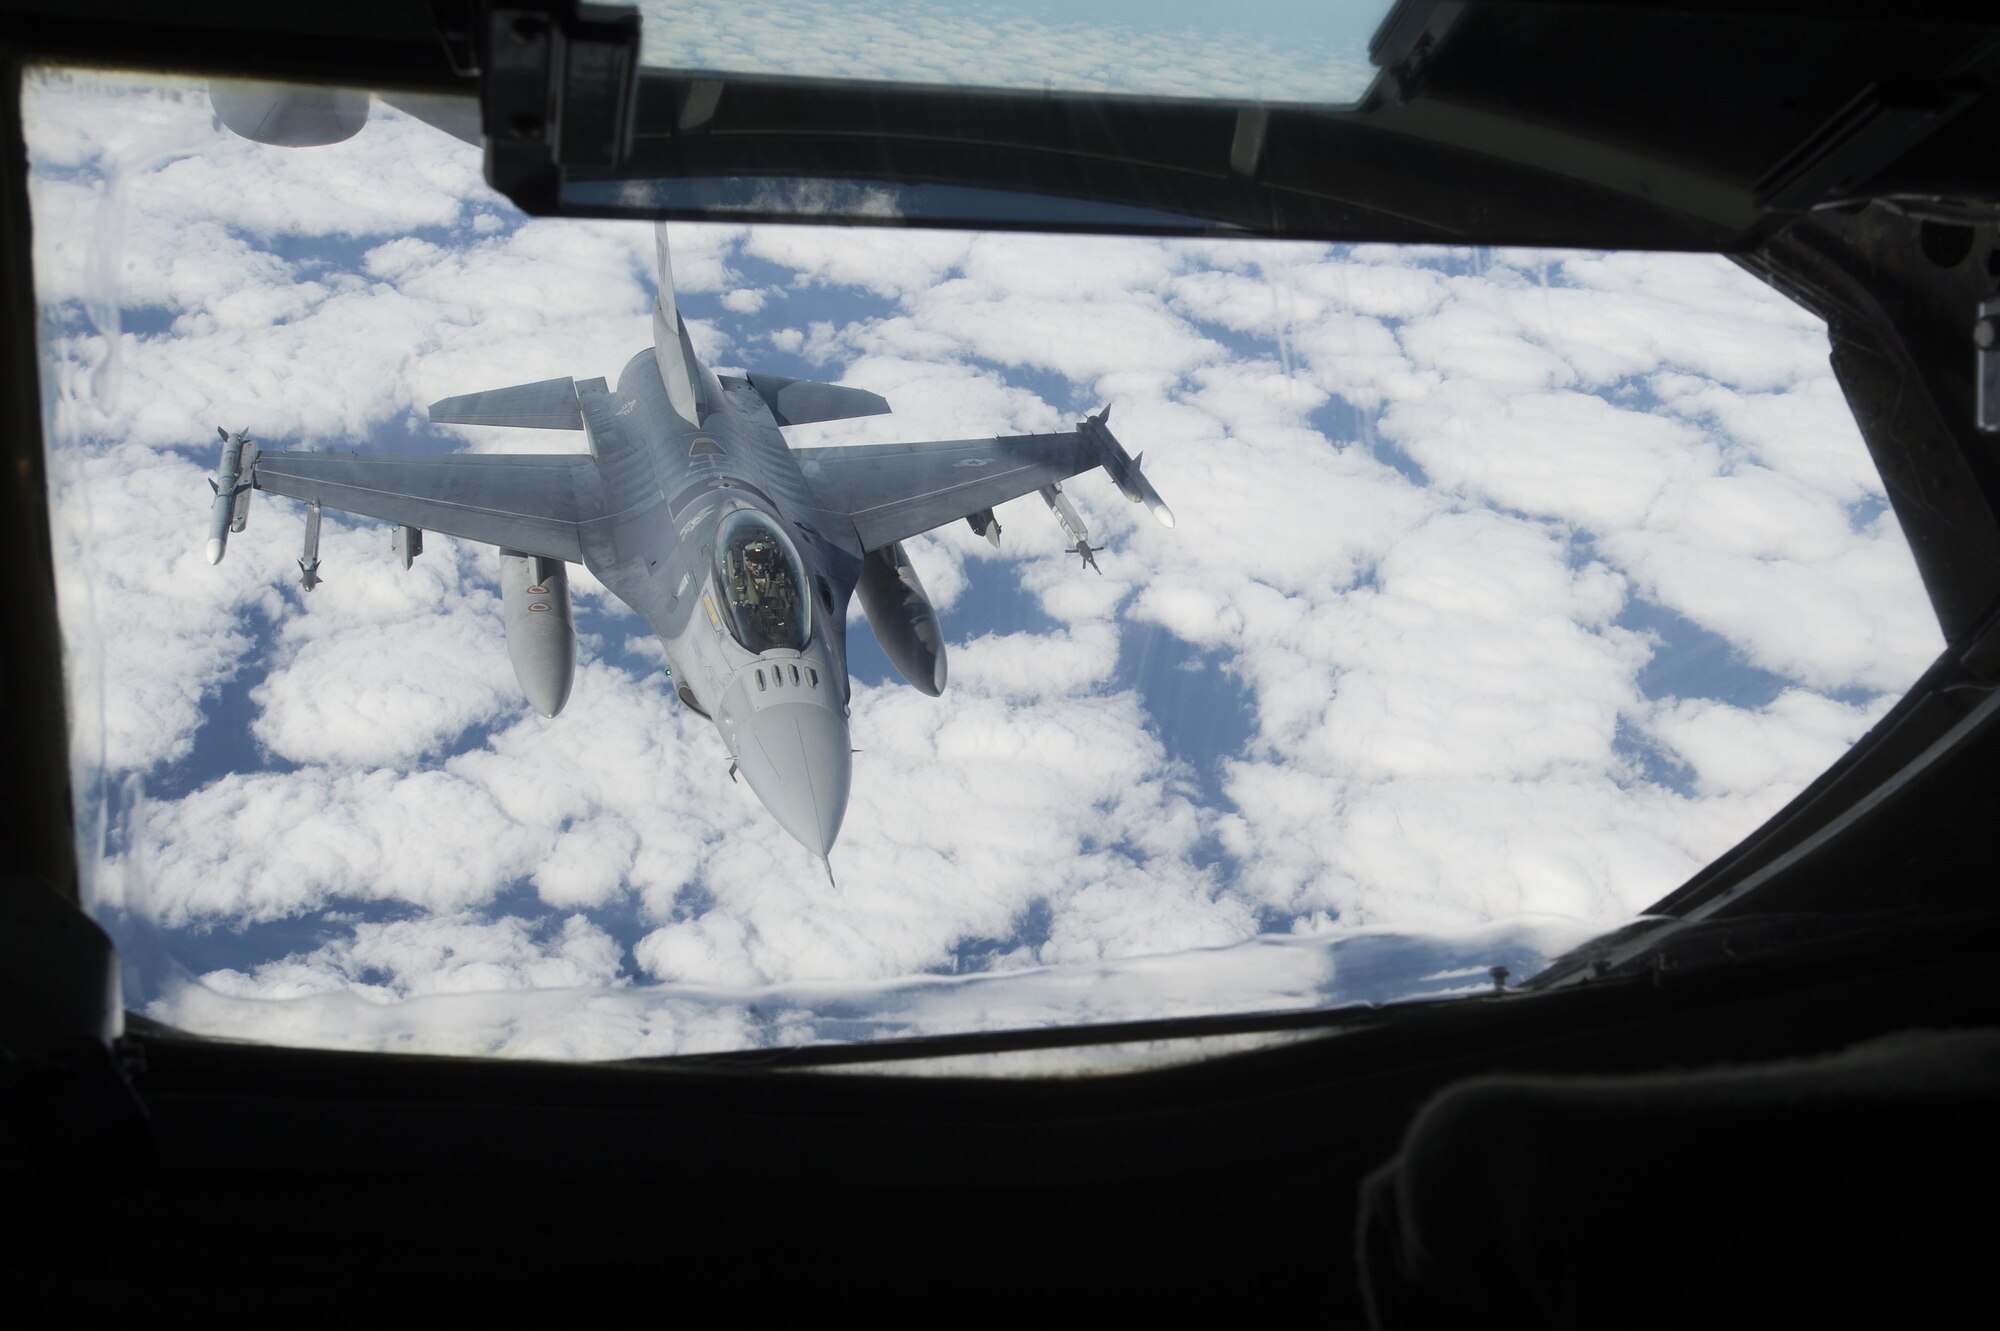 A U.S. Air Force F-16CM Fighting Falcon assigned to the 20th Fighter Wing approaches a KC-135 Stratotanker assigned to the 93rd Air Refueling Squadron from Fairchild Air Force Base, Wash., during collaborative refueling training over the Atlantic Ocean, Dec. 21, 2016. KC-135s are capable of carrying and transferring up to 200,000 pounds of fuel, extending the flying time of aircraft such as the F-16 by eliminating the need for pilots to refuel on land. (U.S. Air Force photo by Senior Airman Zade Vadnais)